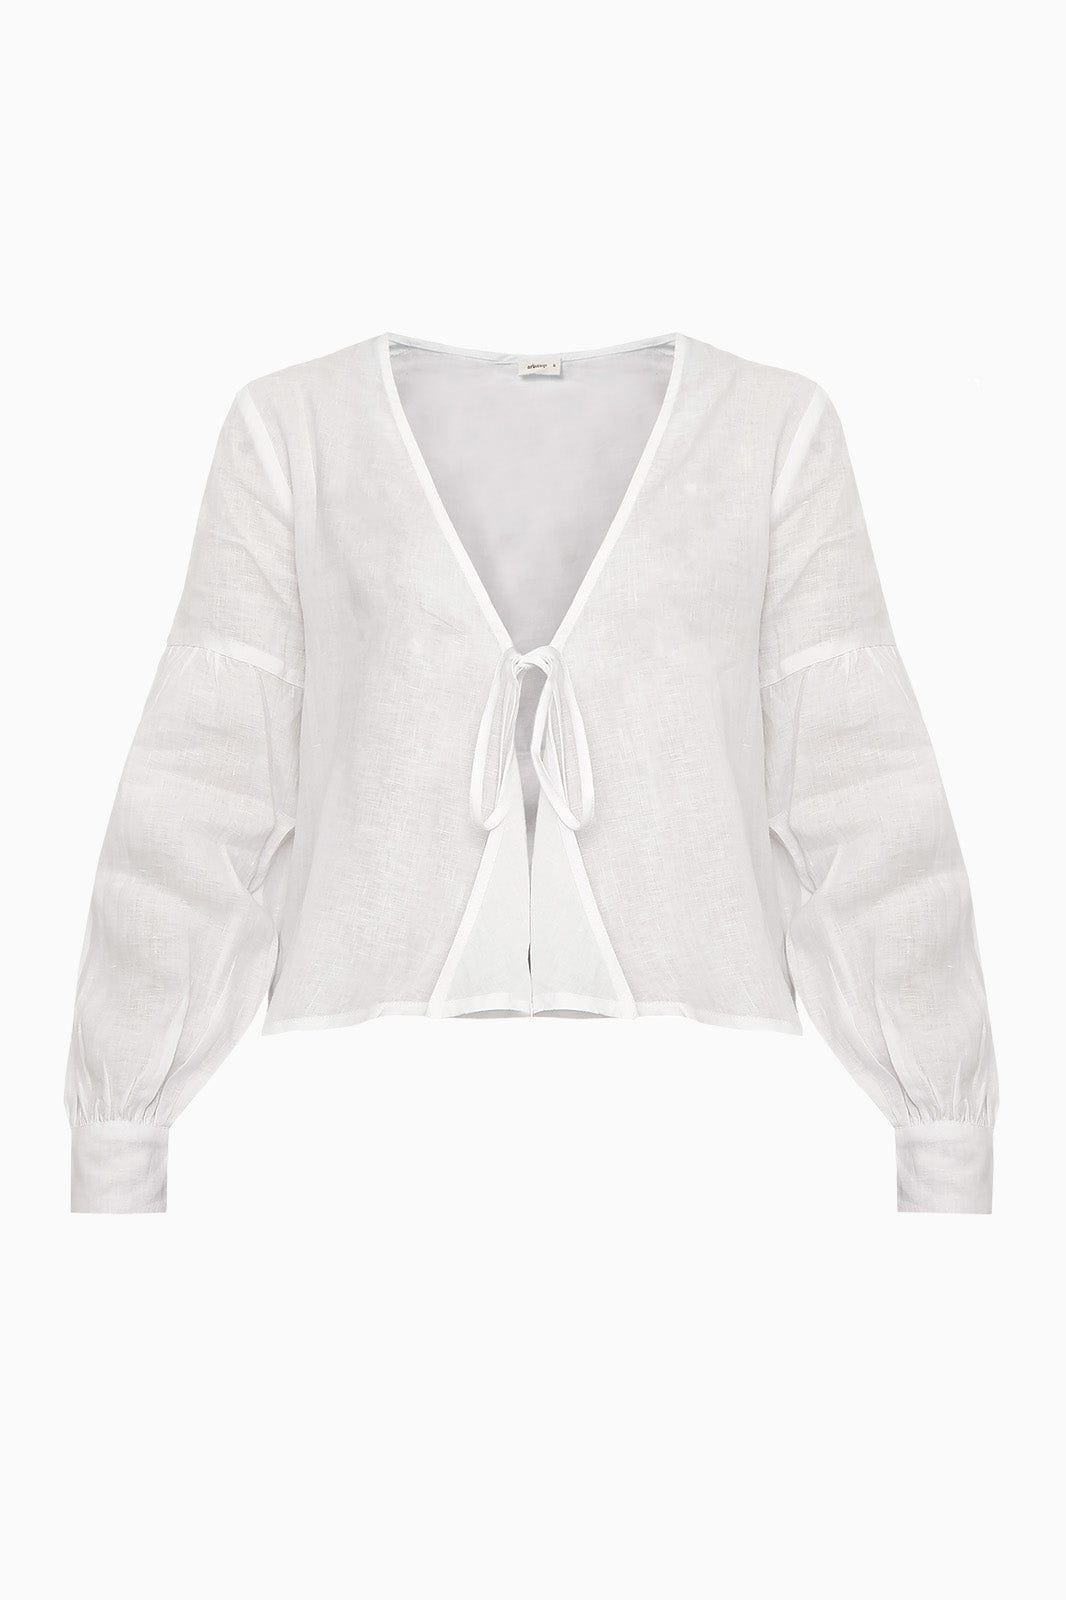 arkitaip Blouses The Anna Blouse in white